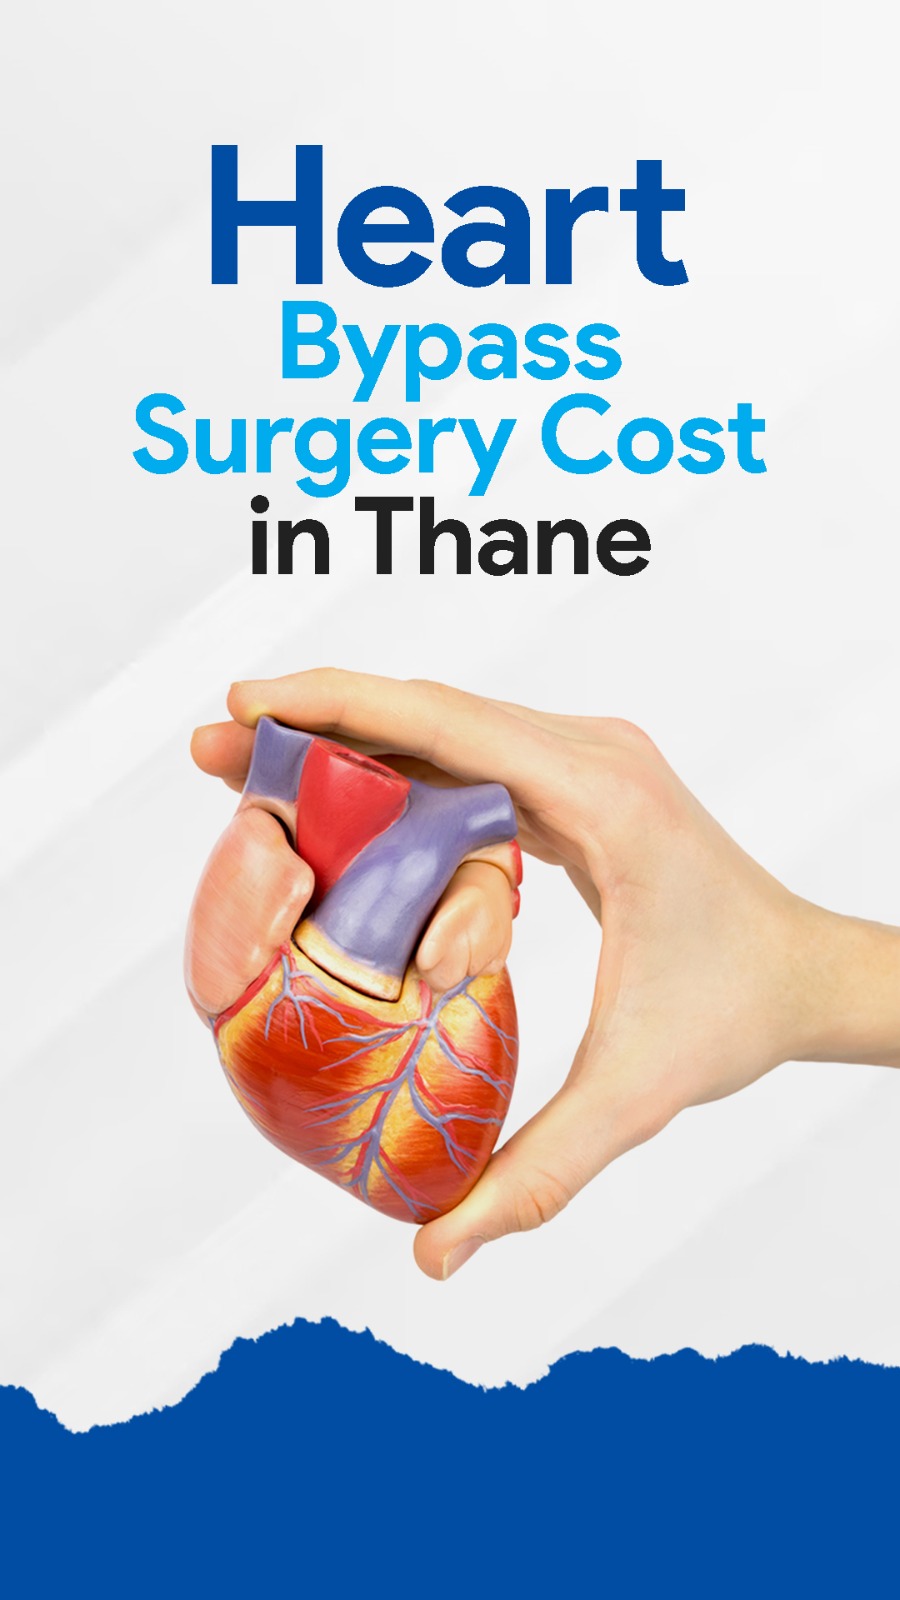 Heart Bypass Surgery Cost in Thane